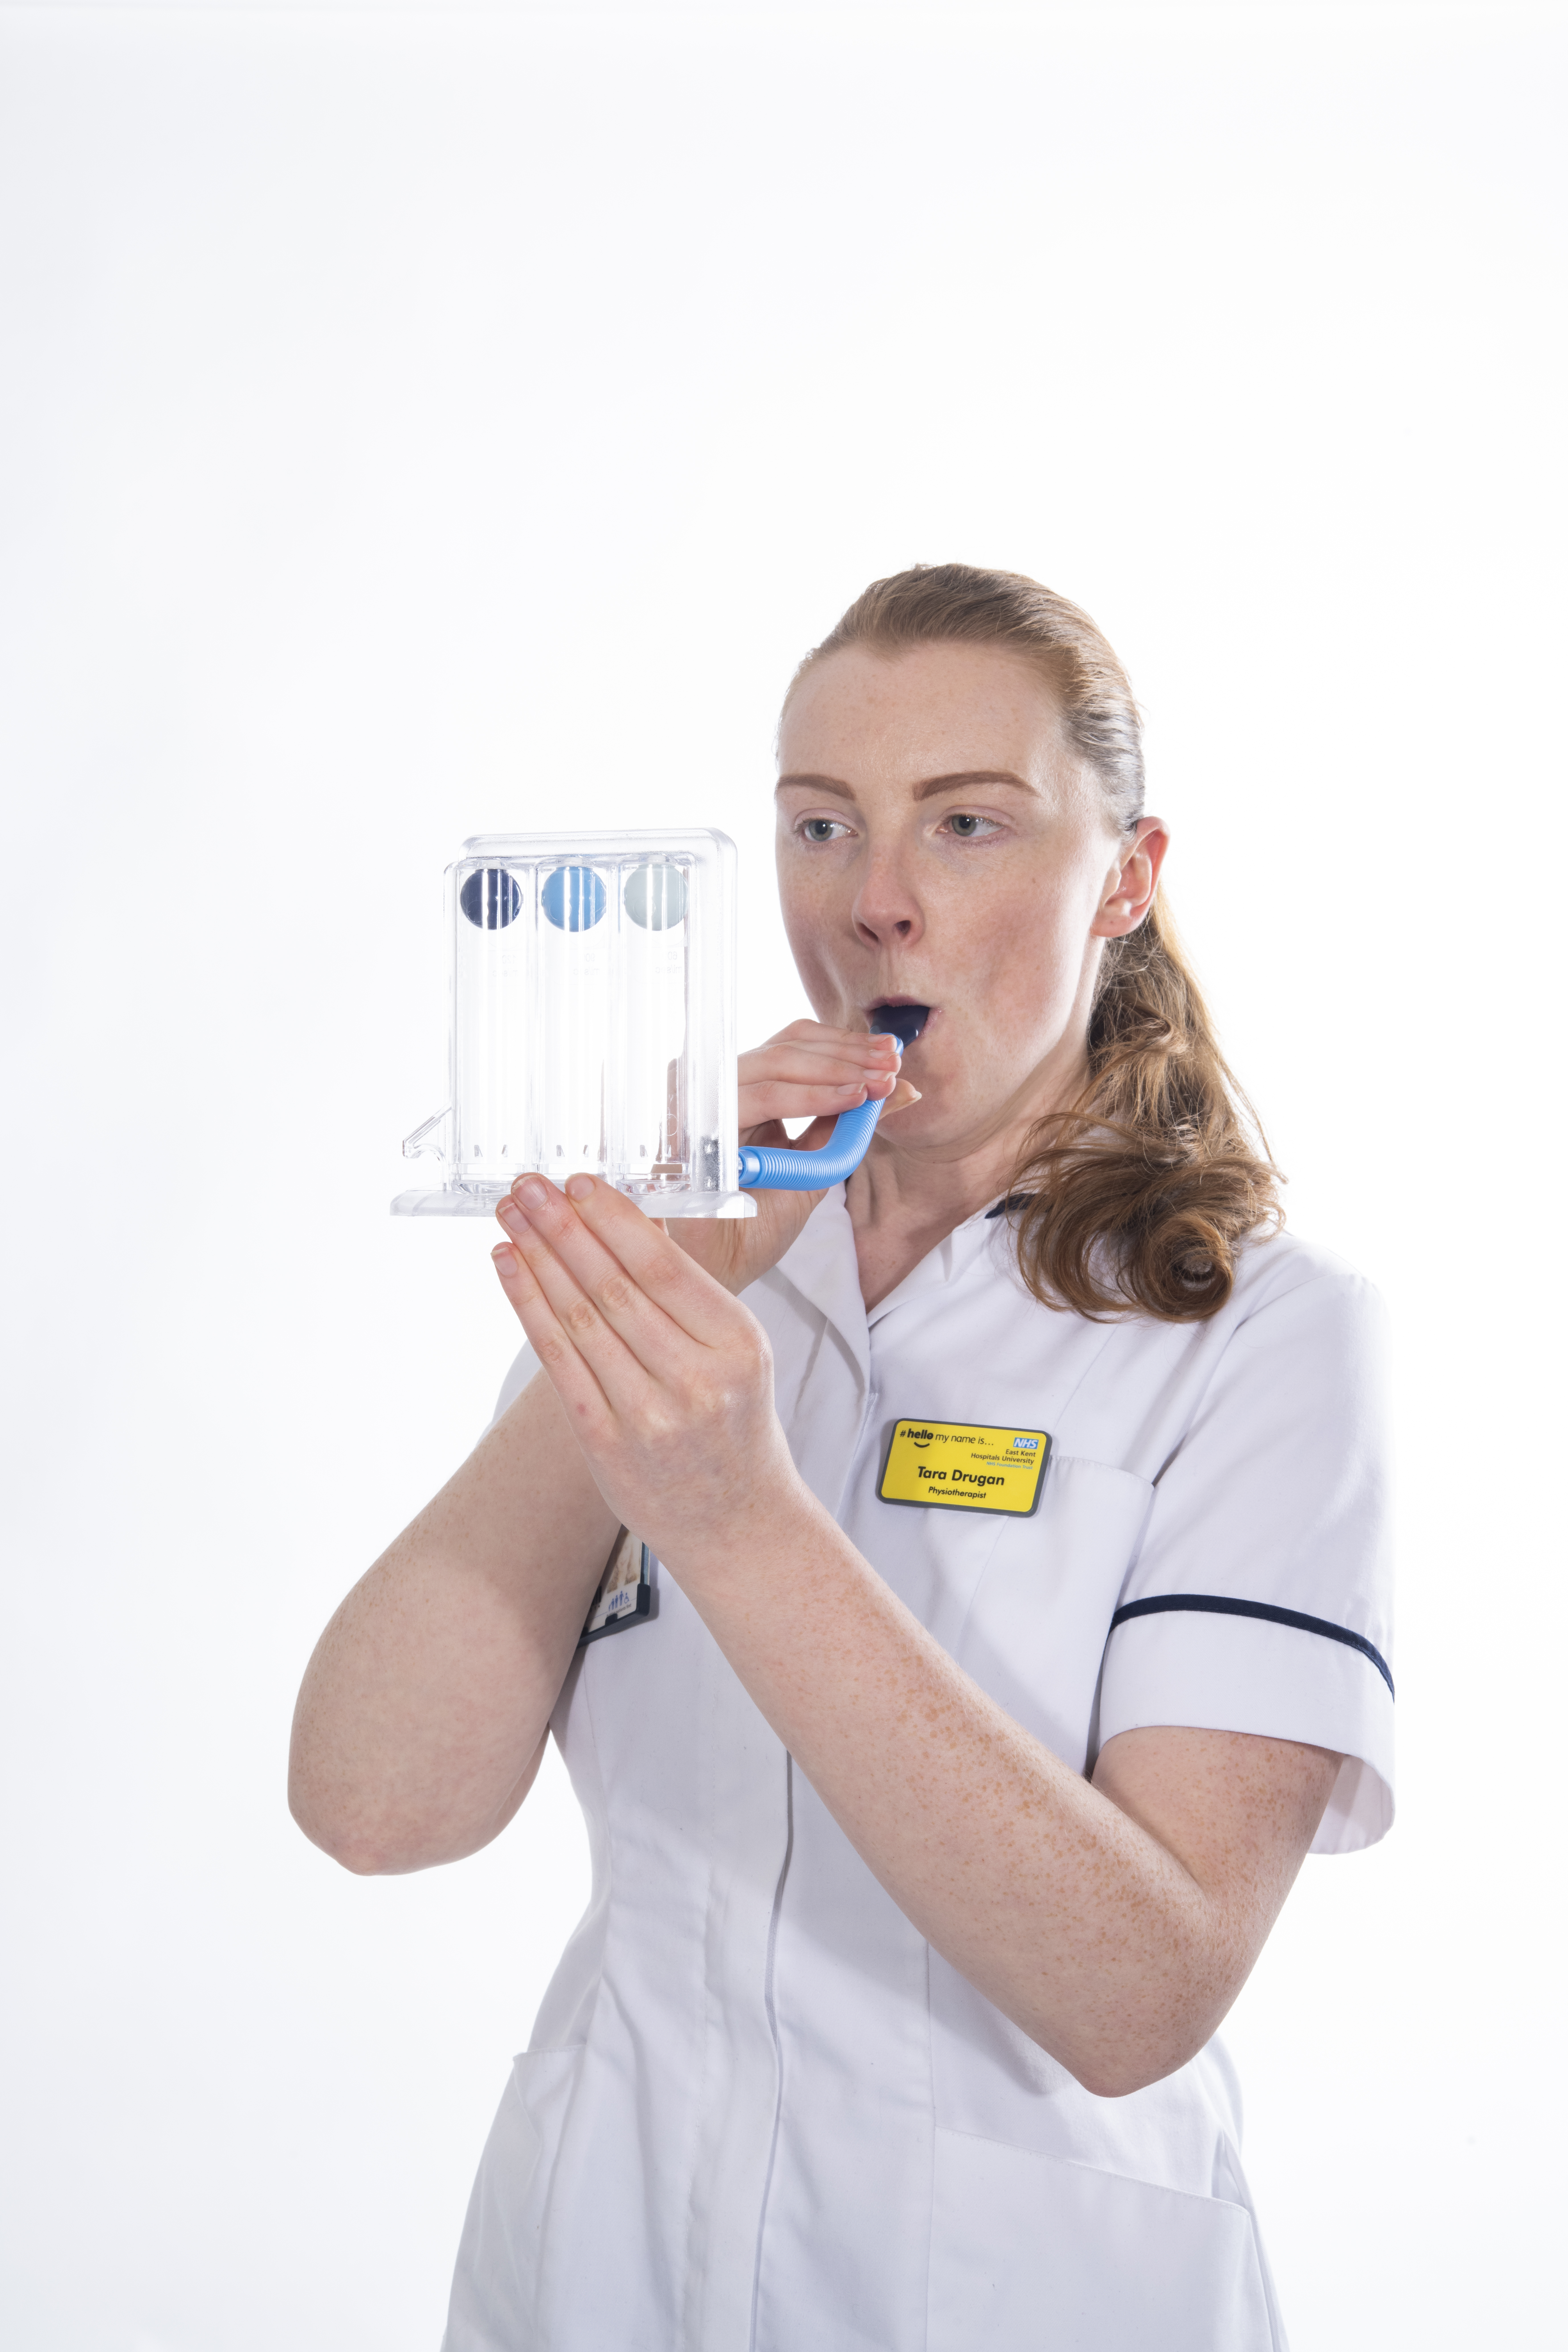 Blow into the incentive spirometer and make three balls rise